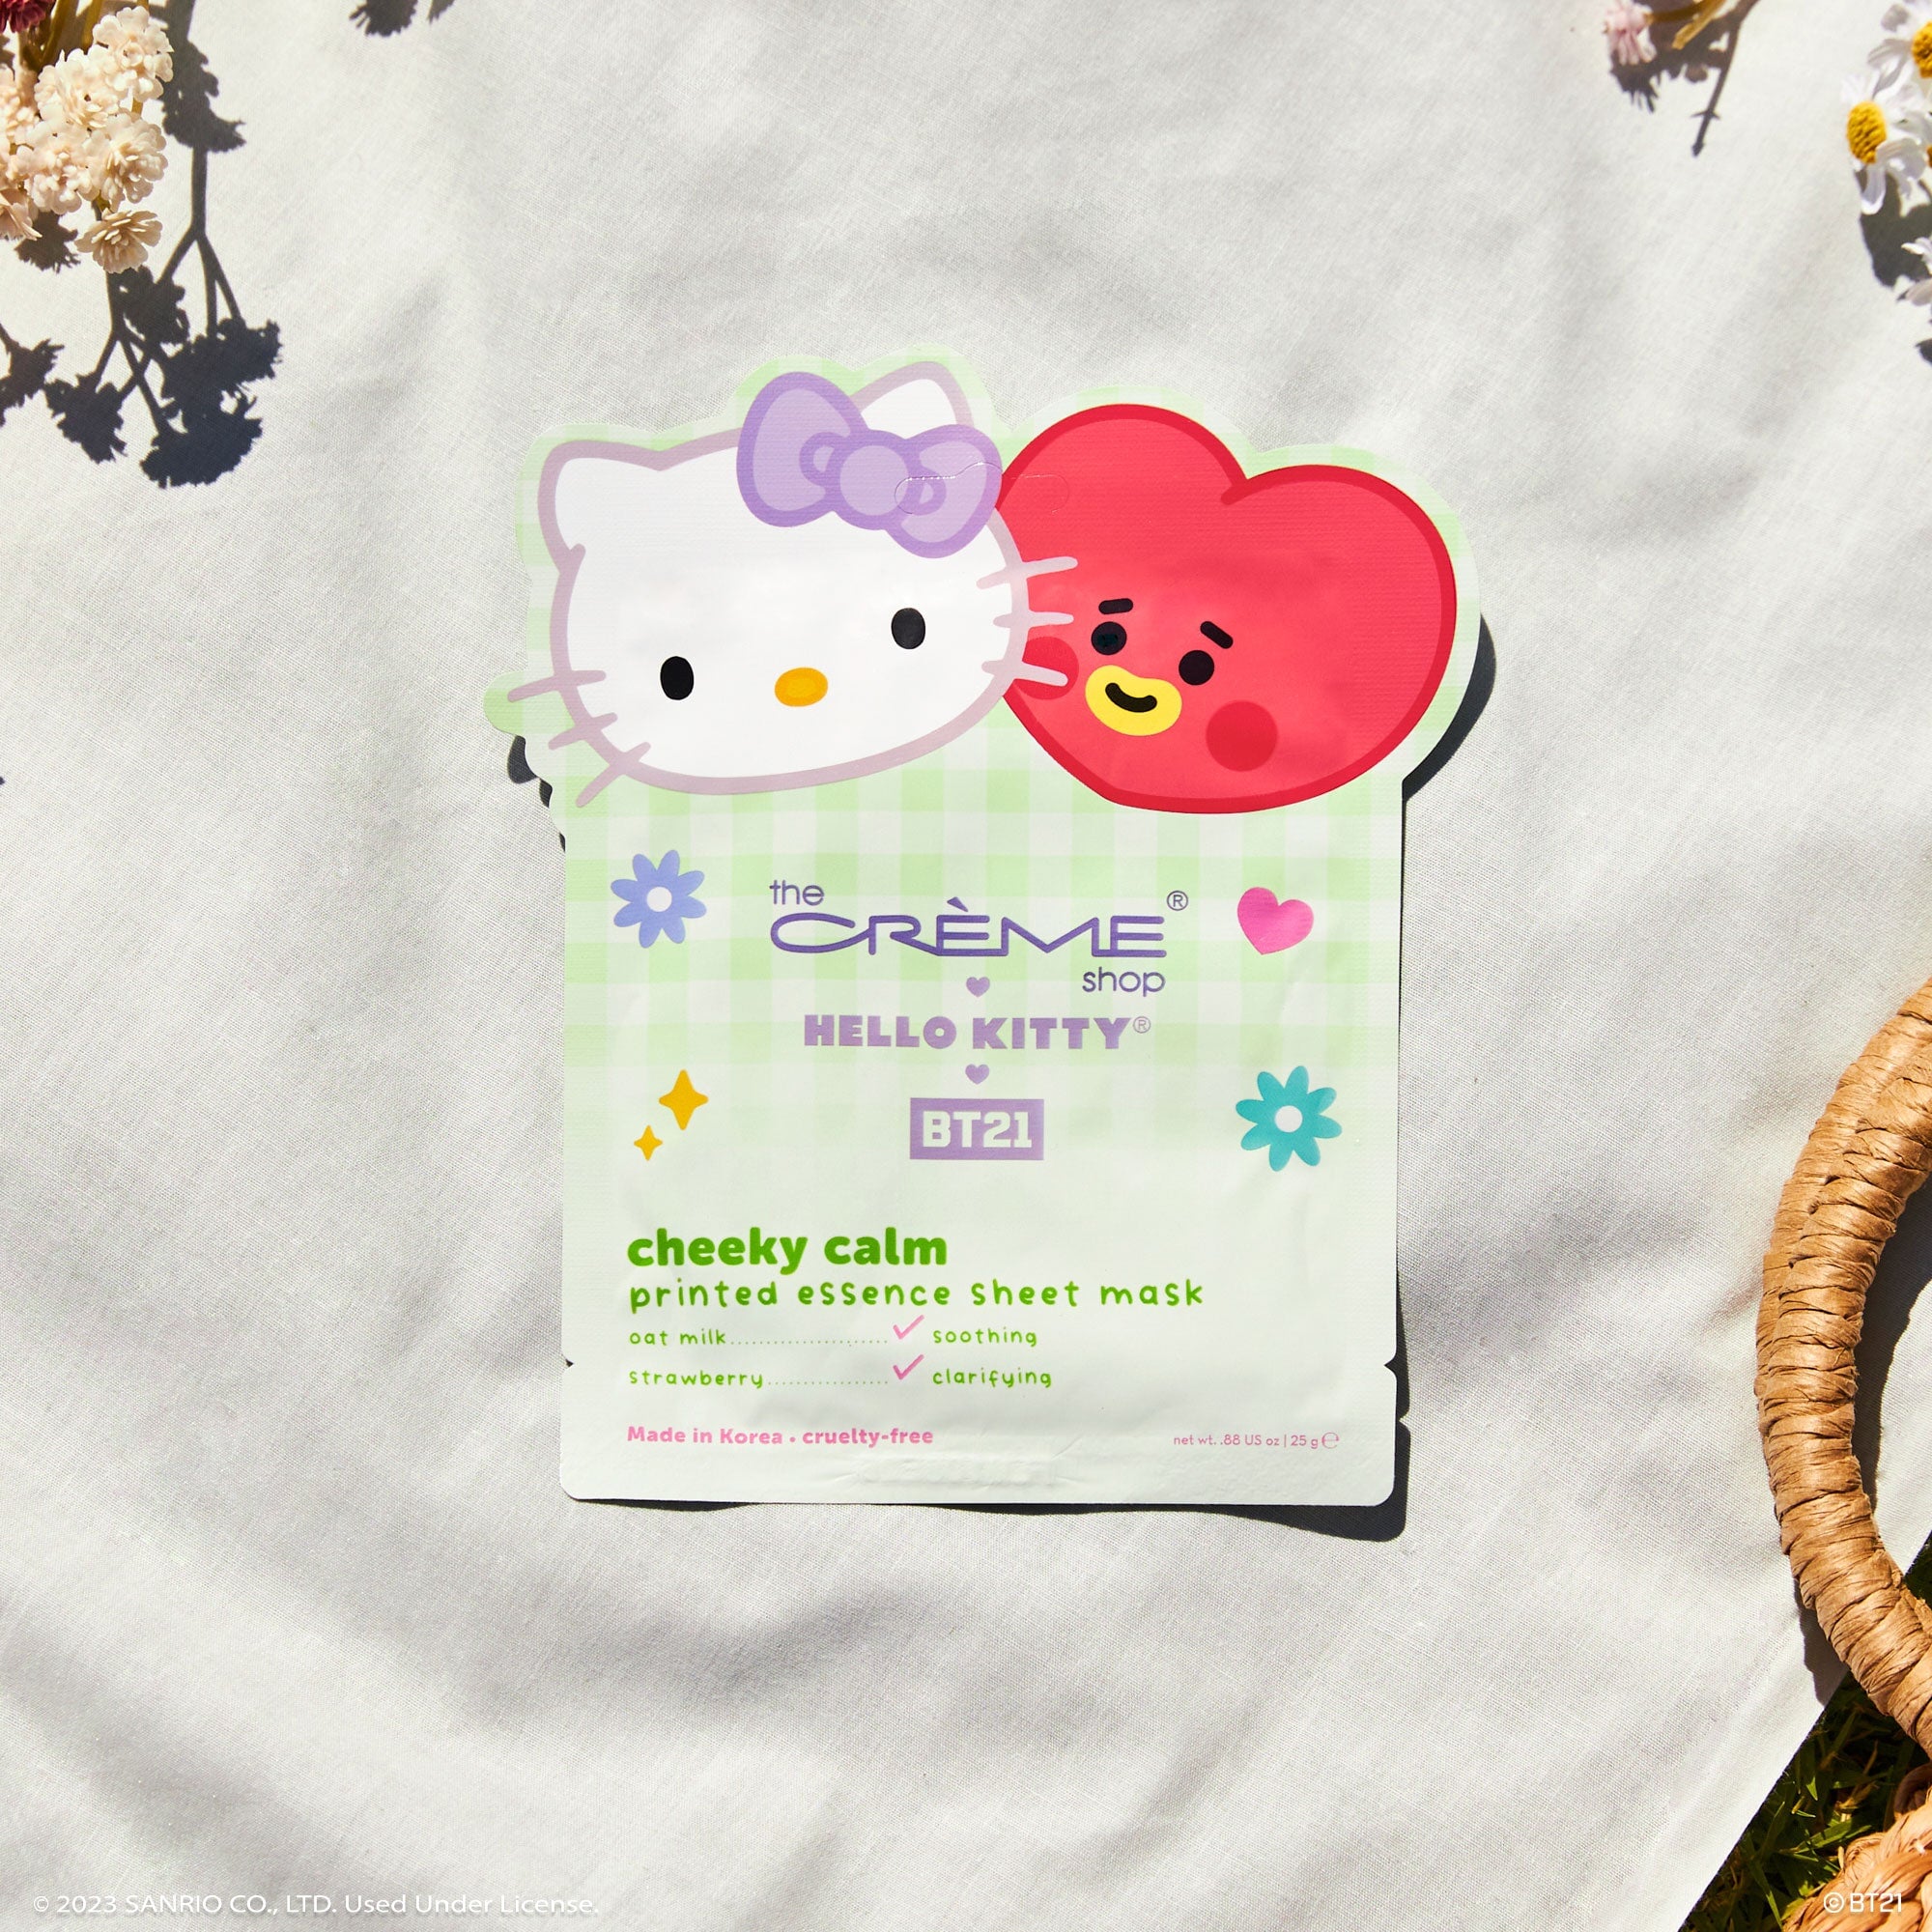 Hello Kitty & BT21 Cheeky Calm Printed Essence Sheet Mask with Oatmilk and Strawberry, $4